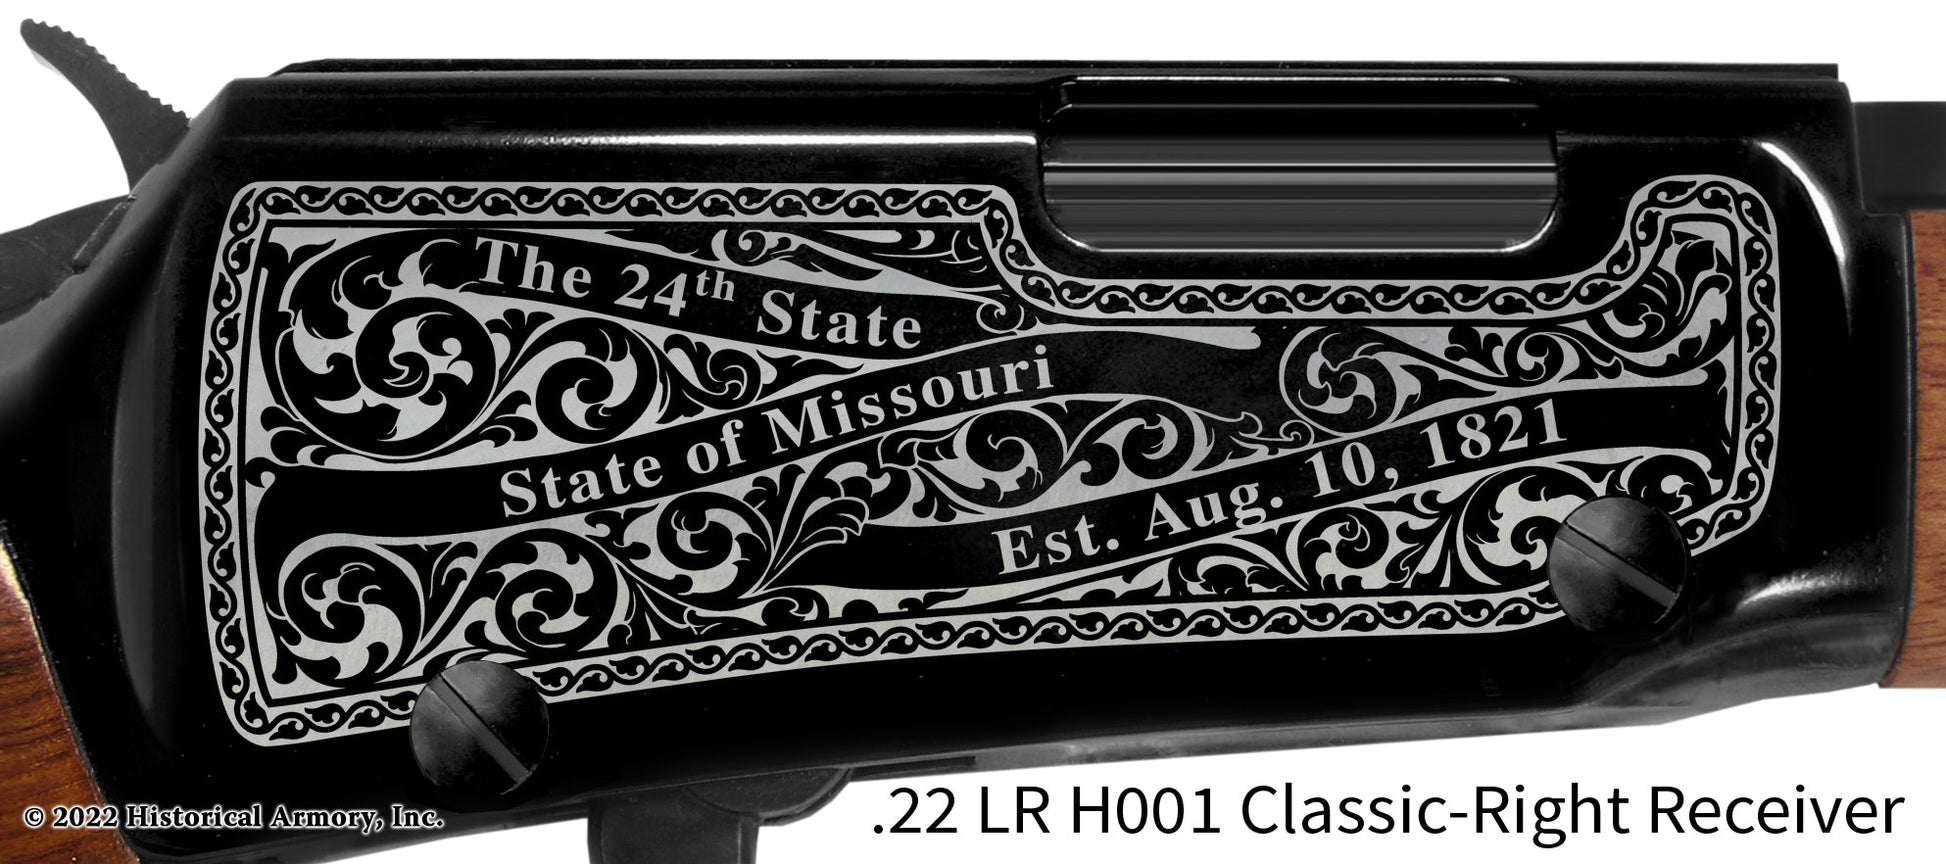 Crawford County Missouri Engraved Henry H001 Rifle